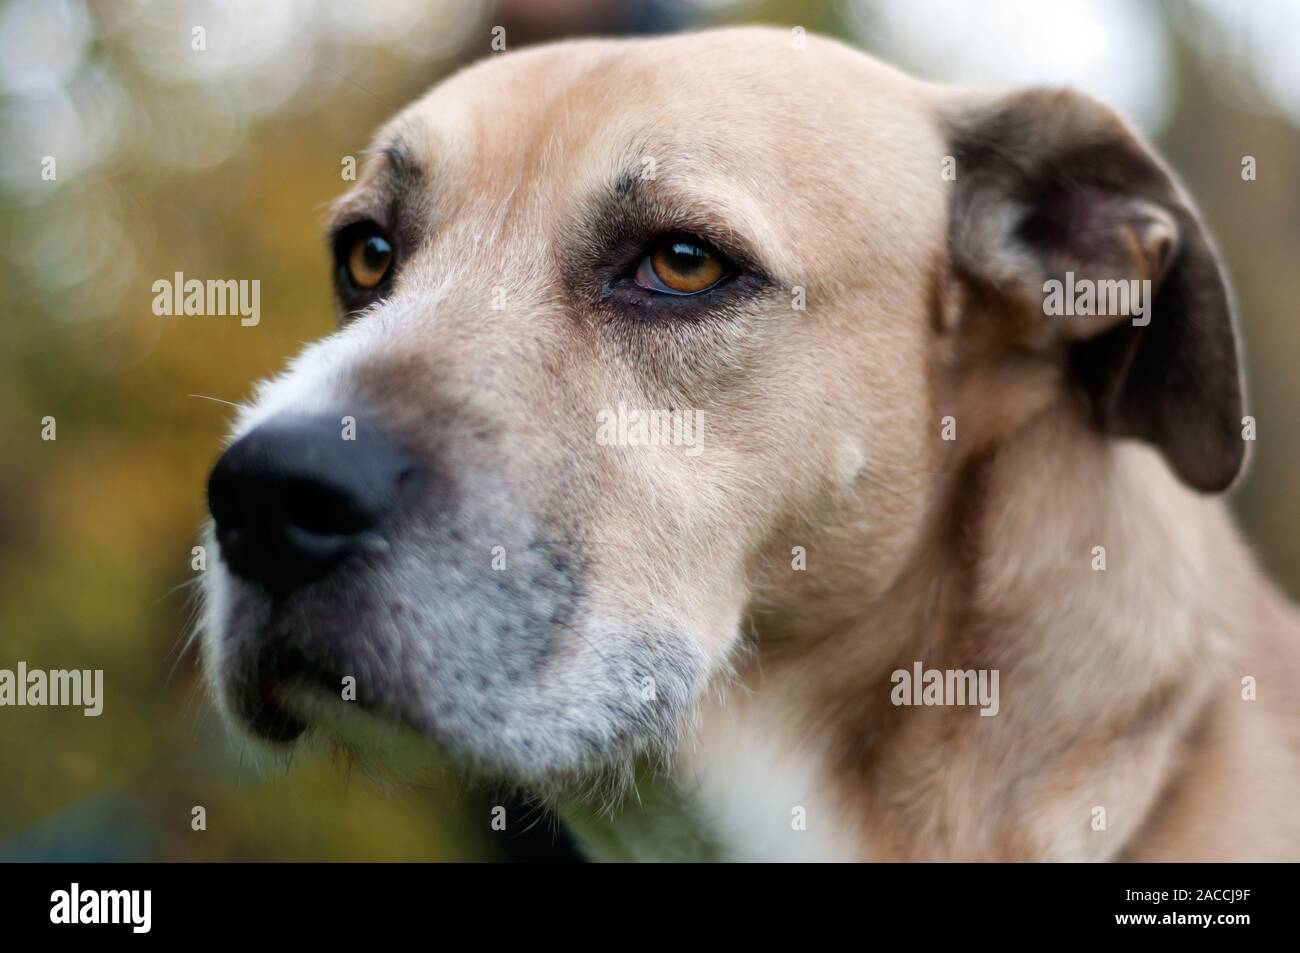 close up of a dog's face with a black big nose. beautiful golden eyes. looking far. outdoor.Animal head close up shot. Stock Photo